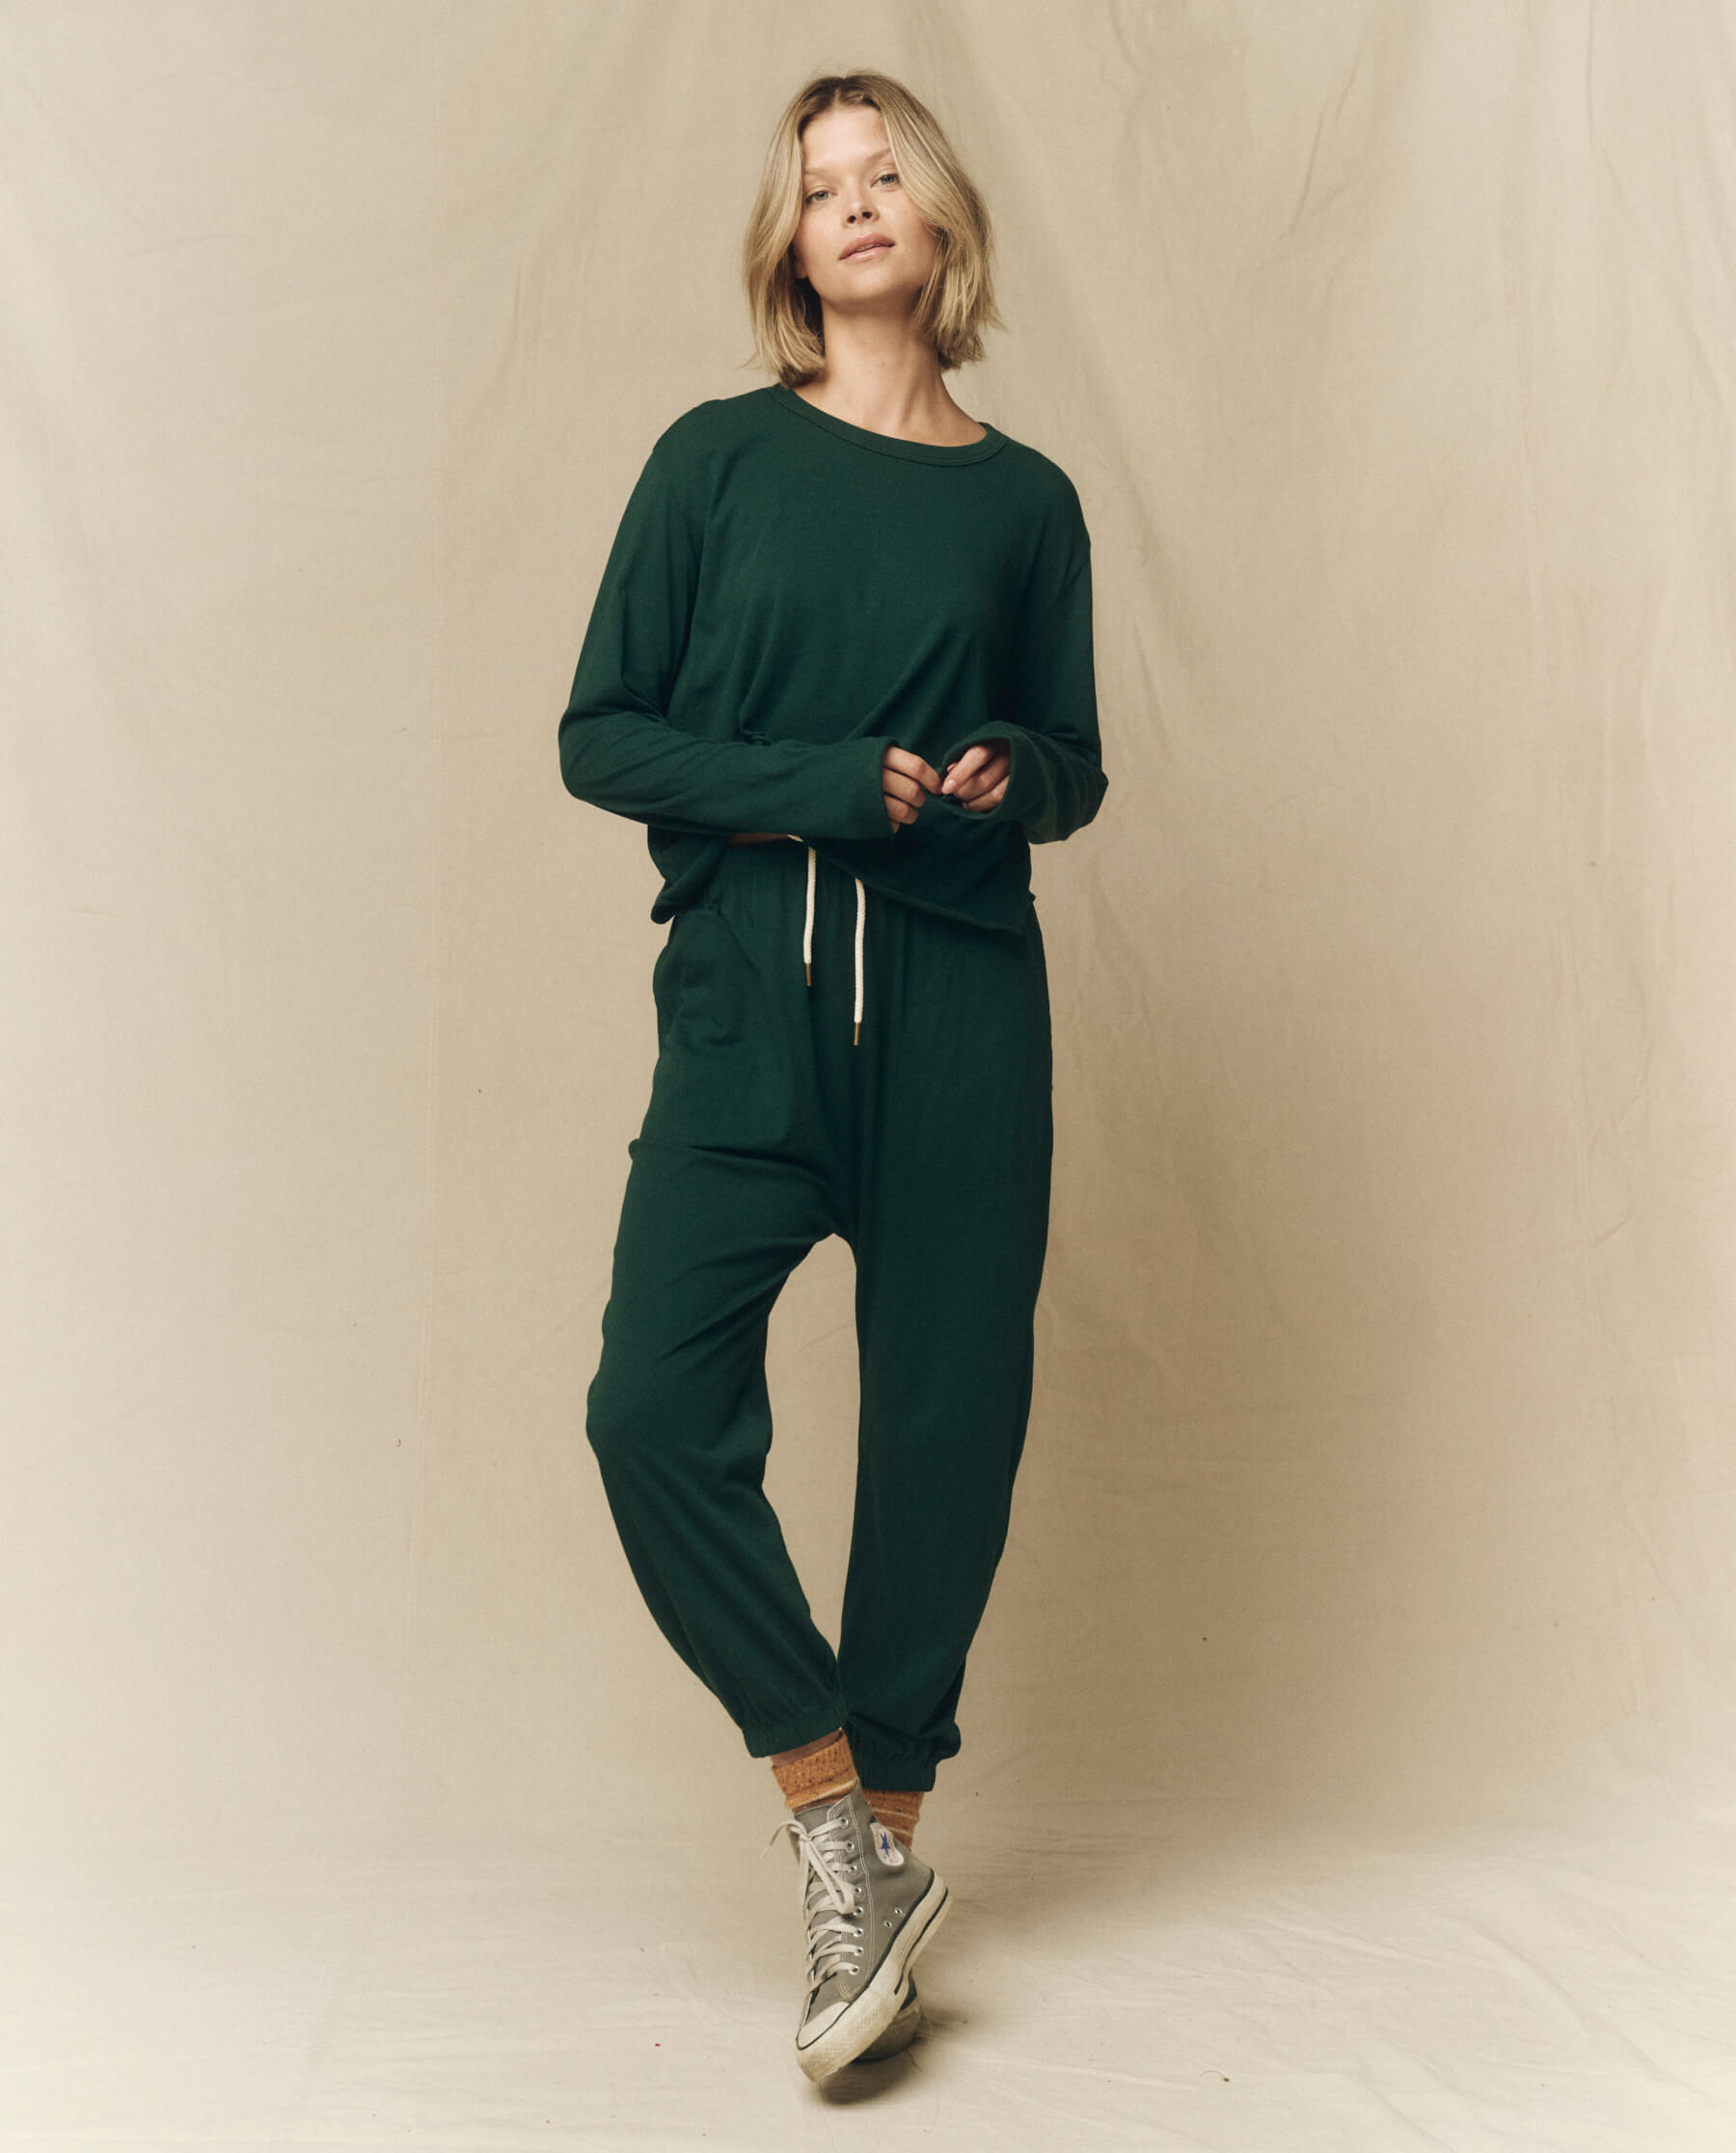 The Jersey Jogger Pant. -- Green Grove SWEATPANTS THE GREAT. FALL 23 KNITS